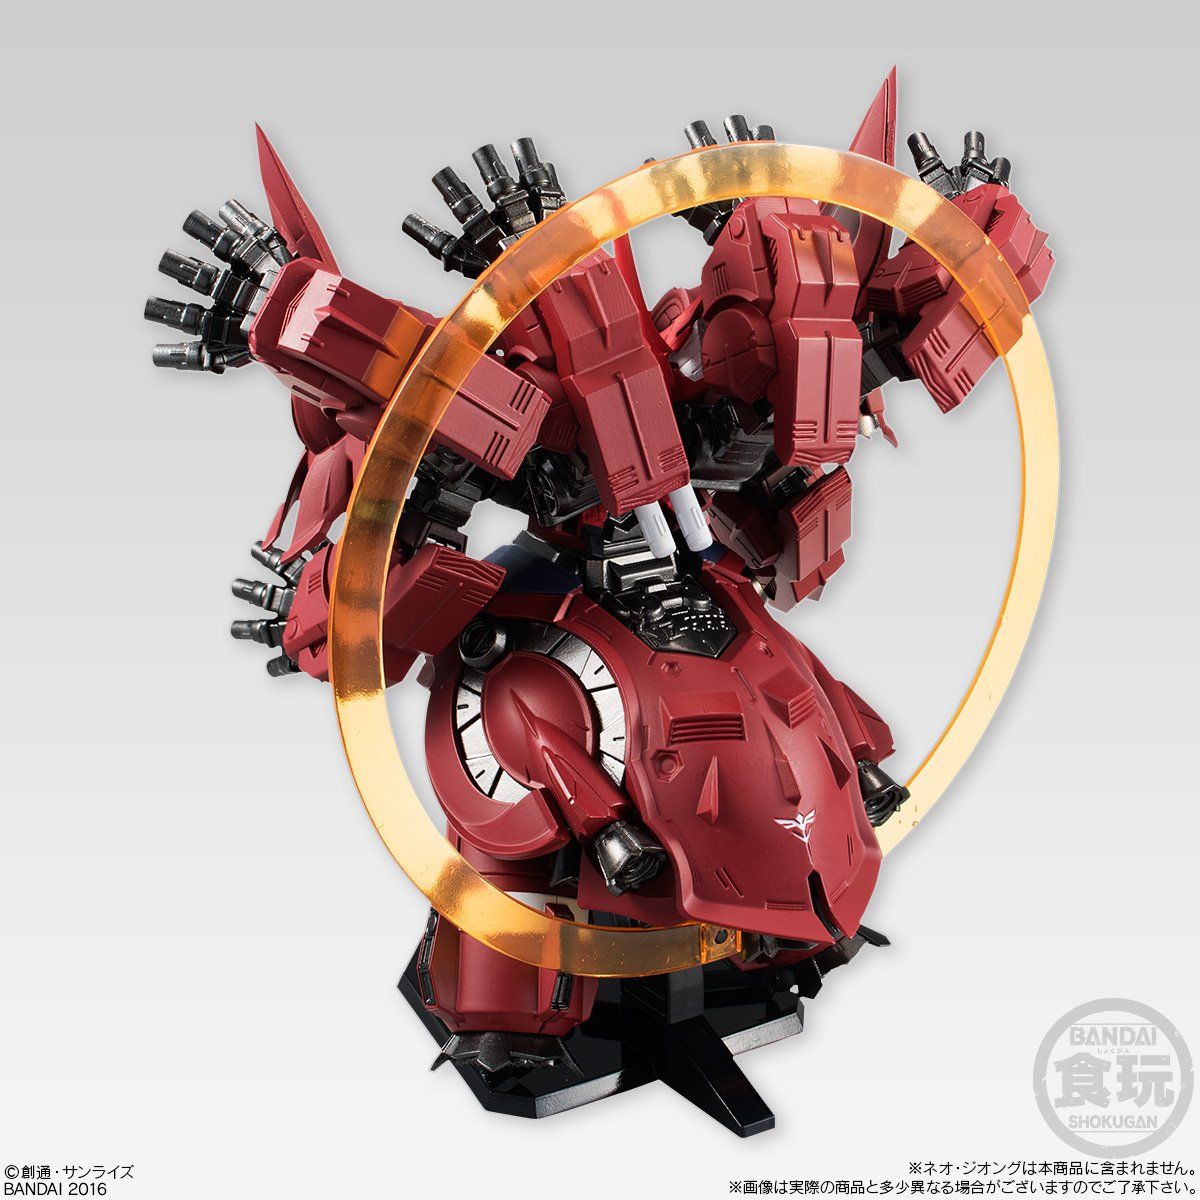 FW Gundam Converge Expansion Parts for NZ-999 Neo Zeong